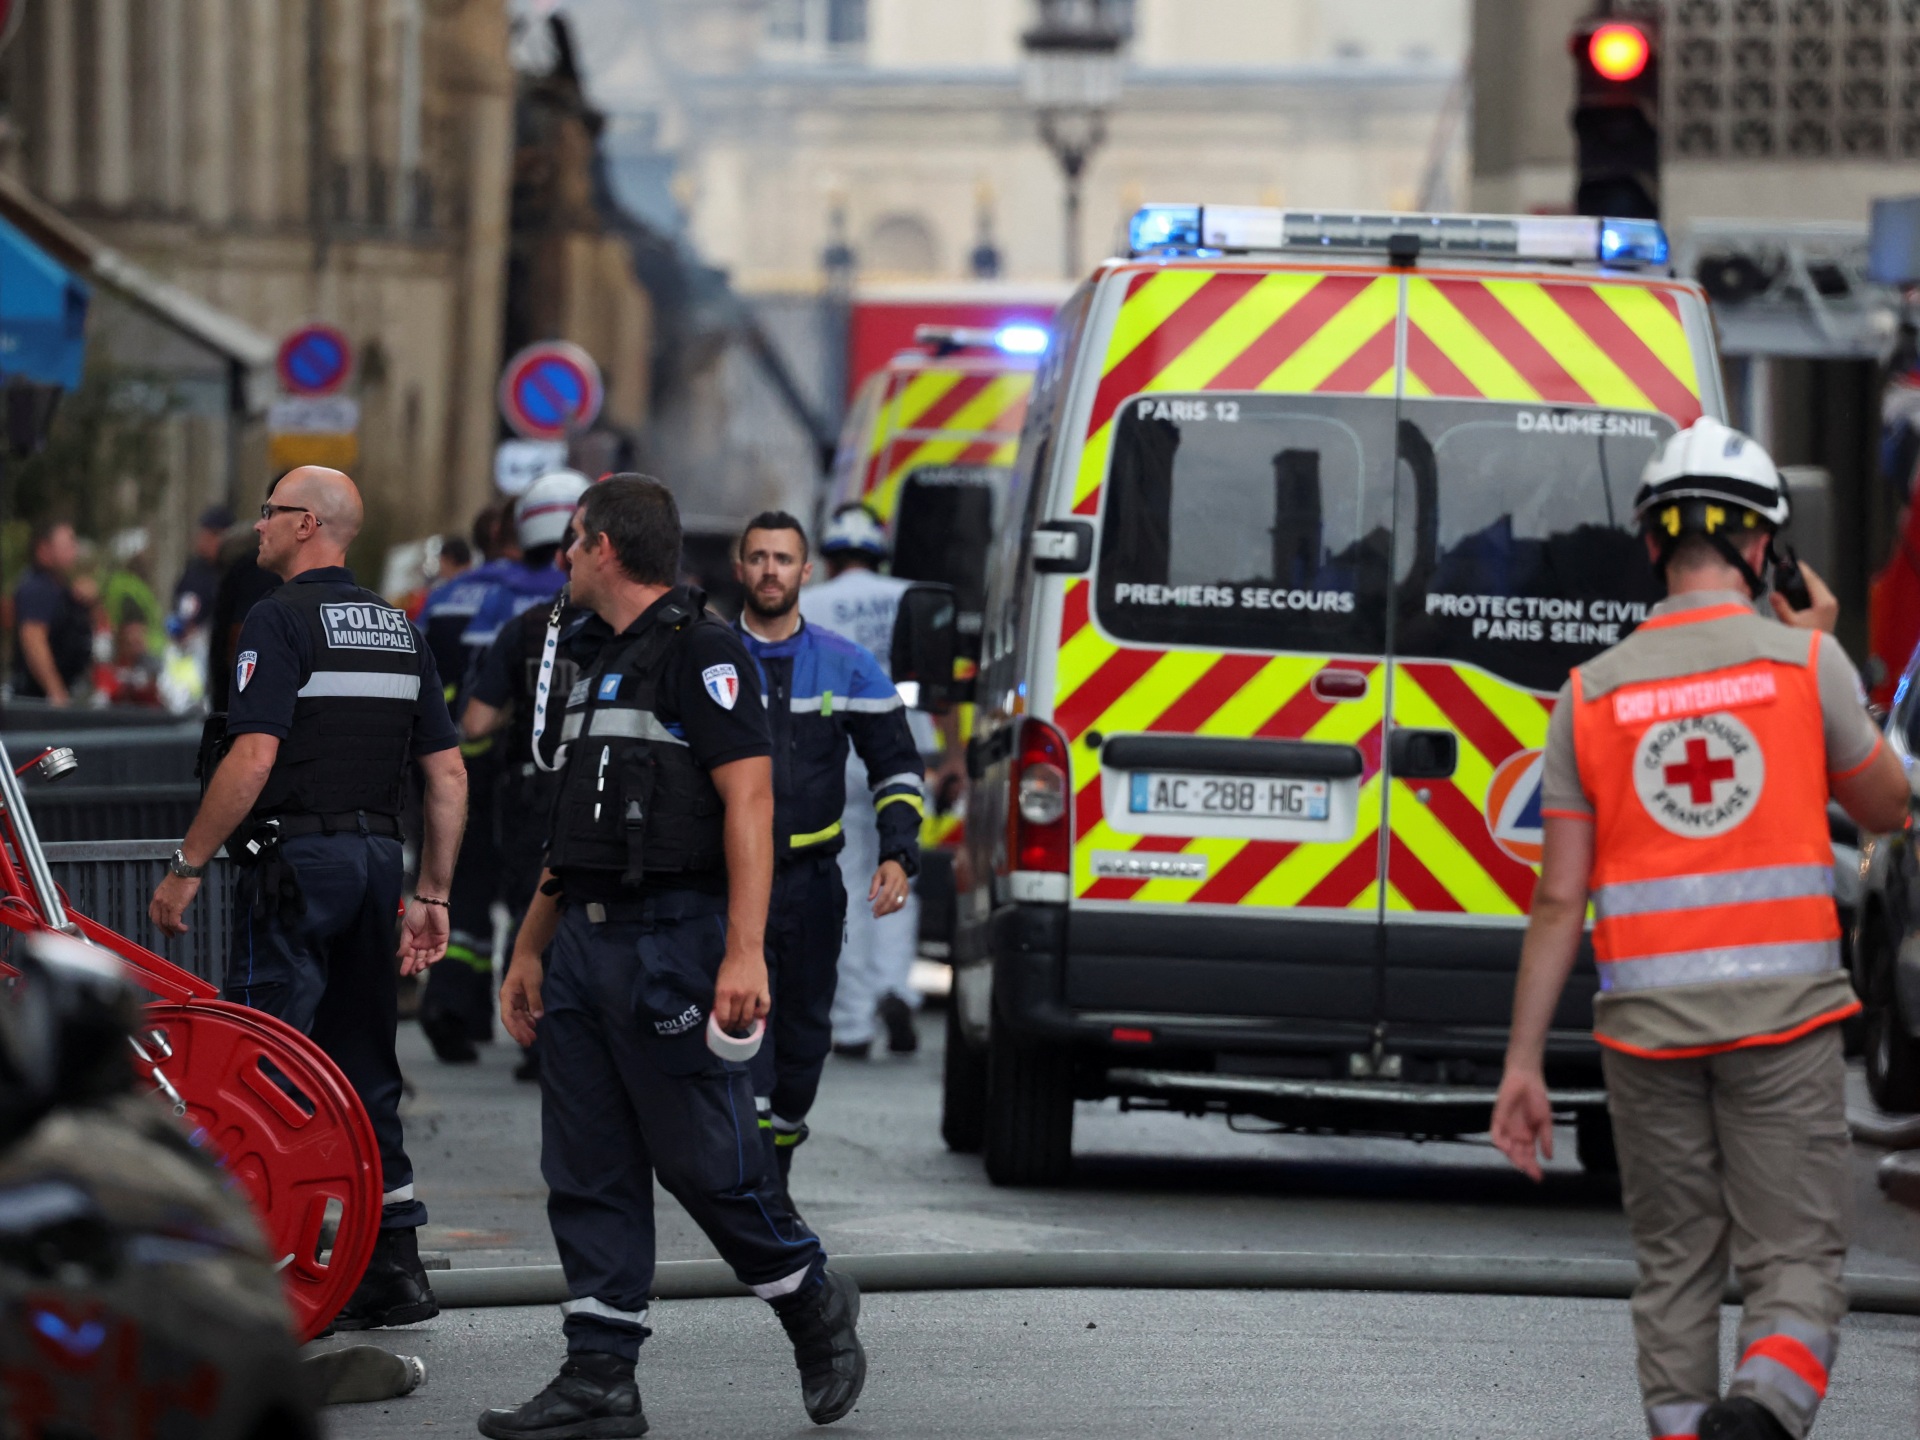 At least 24 injured after Paris explosion